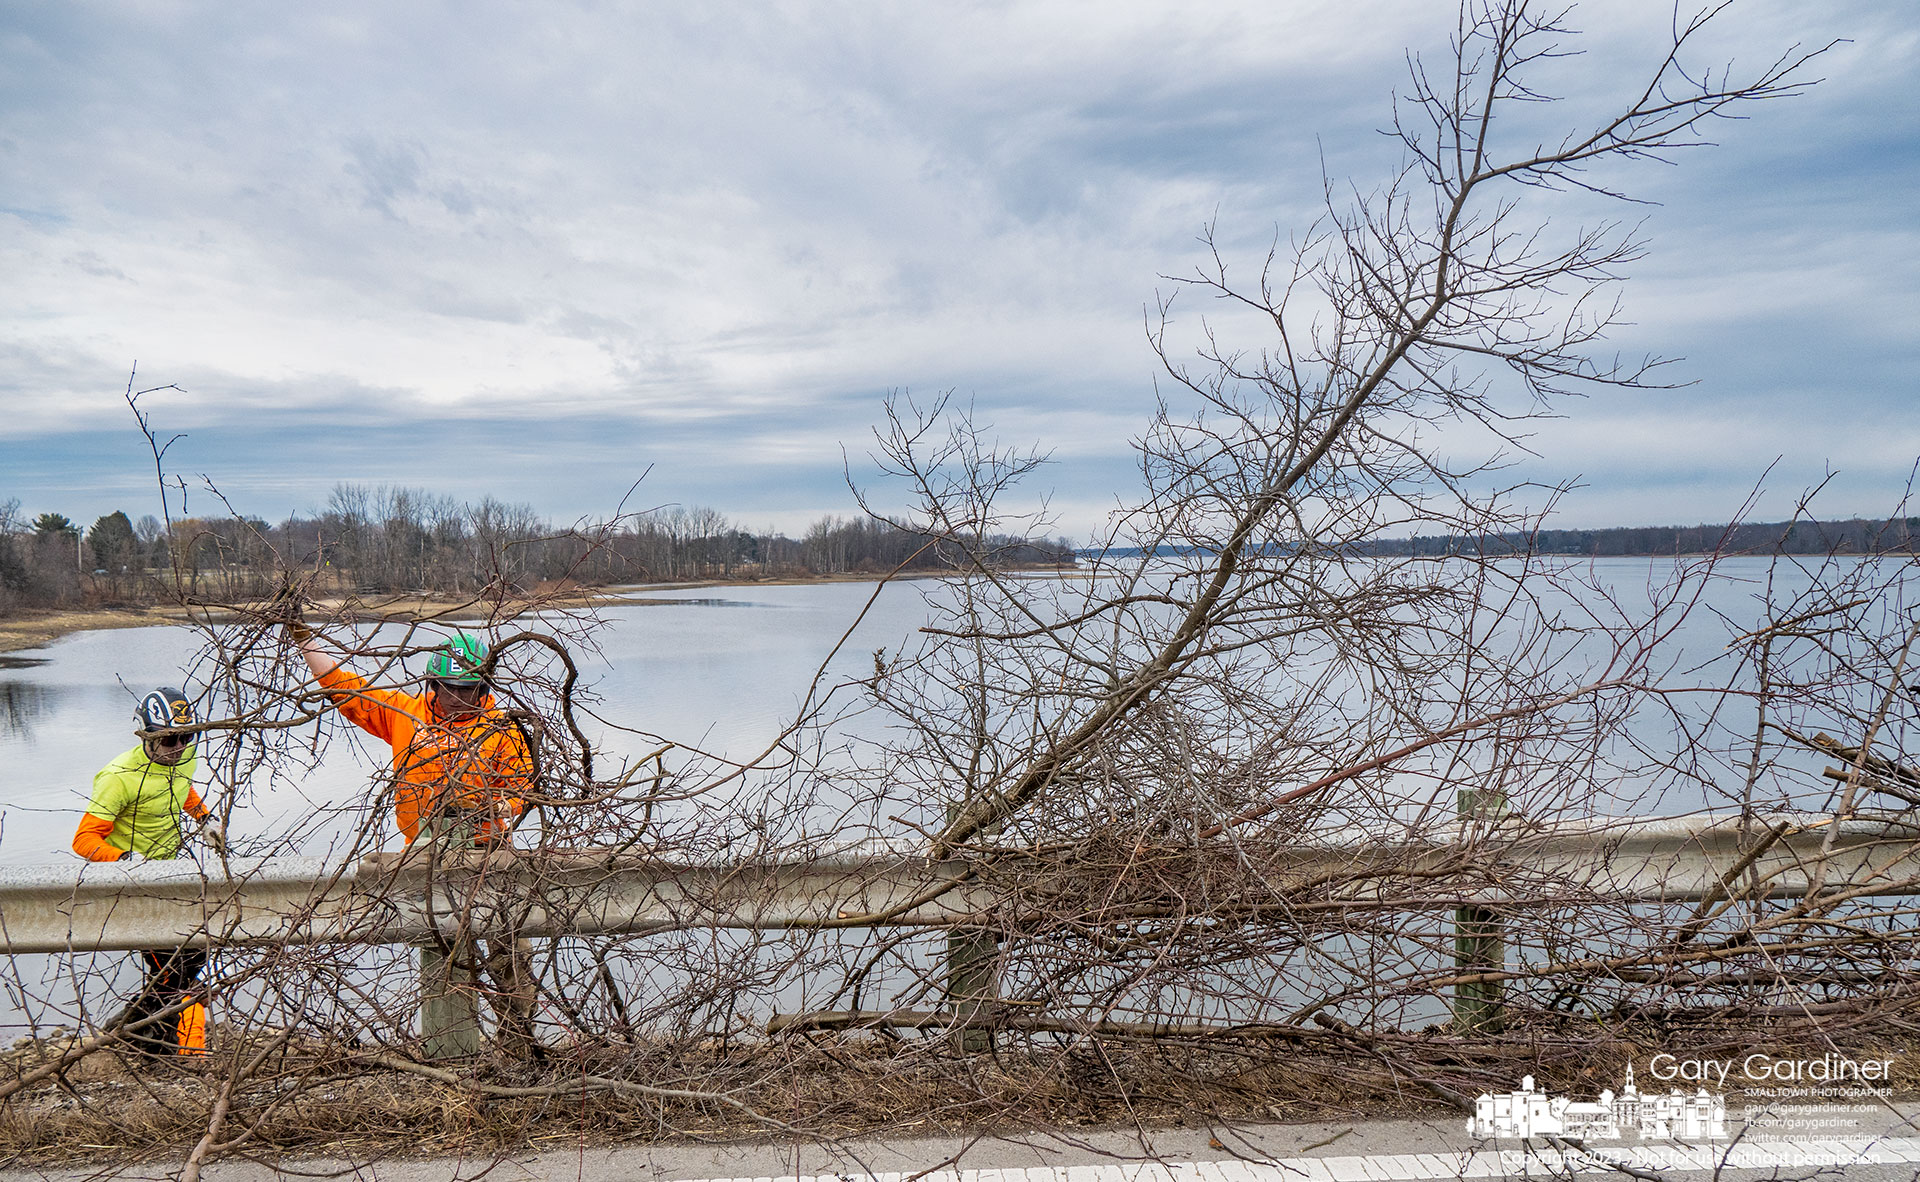 A work crew removes trees and shrubs growing in rocks in the base of Smothers Road over Hoover Reservoir preventing the plant's roots from damaging the important structure and blocking views of the lake. My Final Photo for January 11, 2023. 